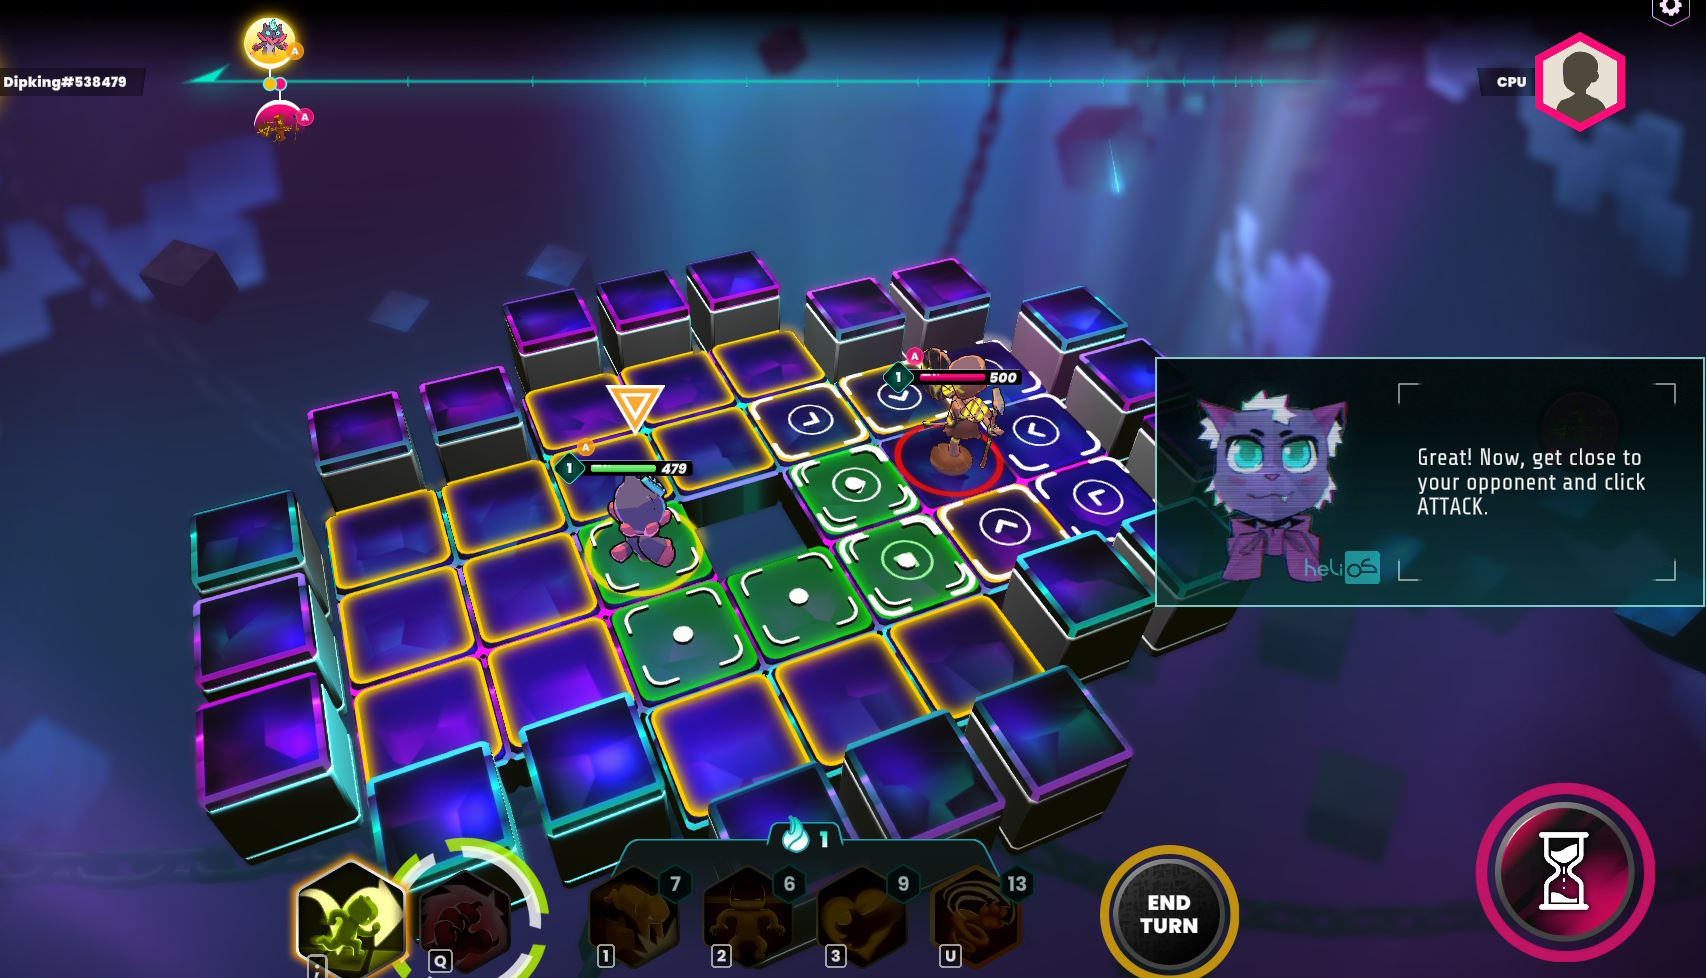 Aurory is a universe of interrelated games and collectables - this is its Tactics tutorial level.